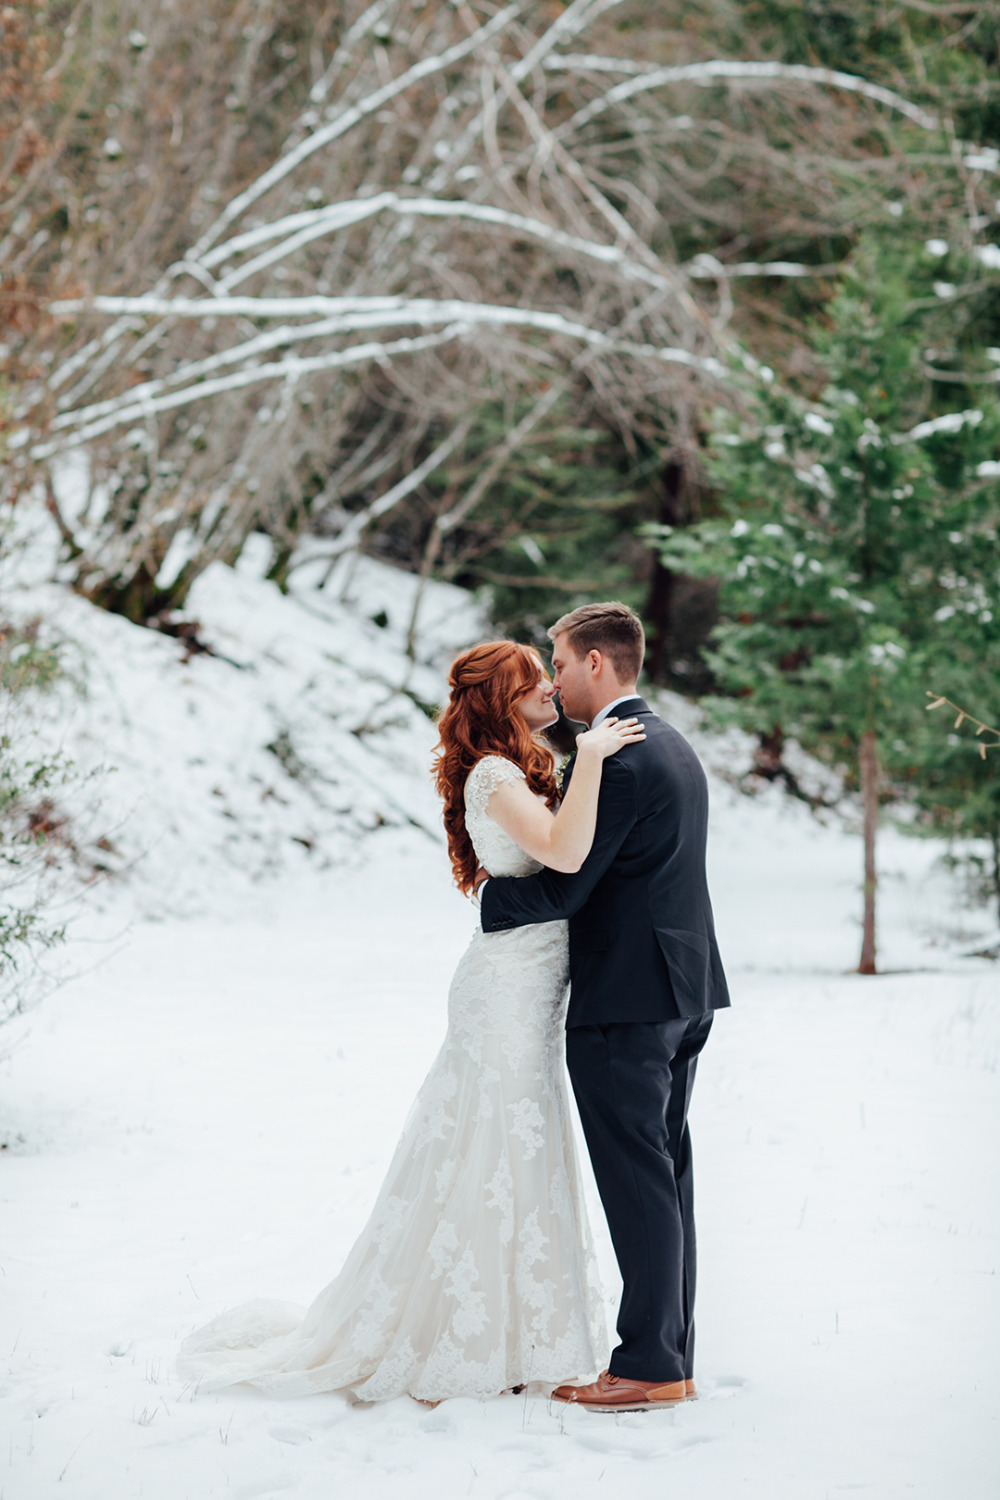 fun in the snow on your wedding day